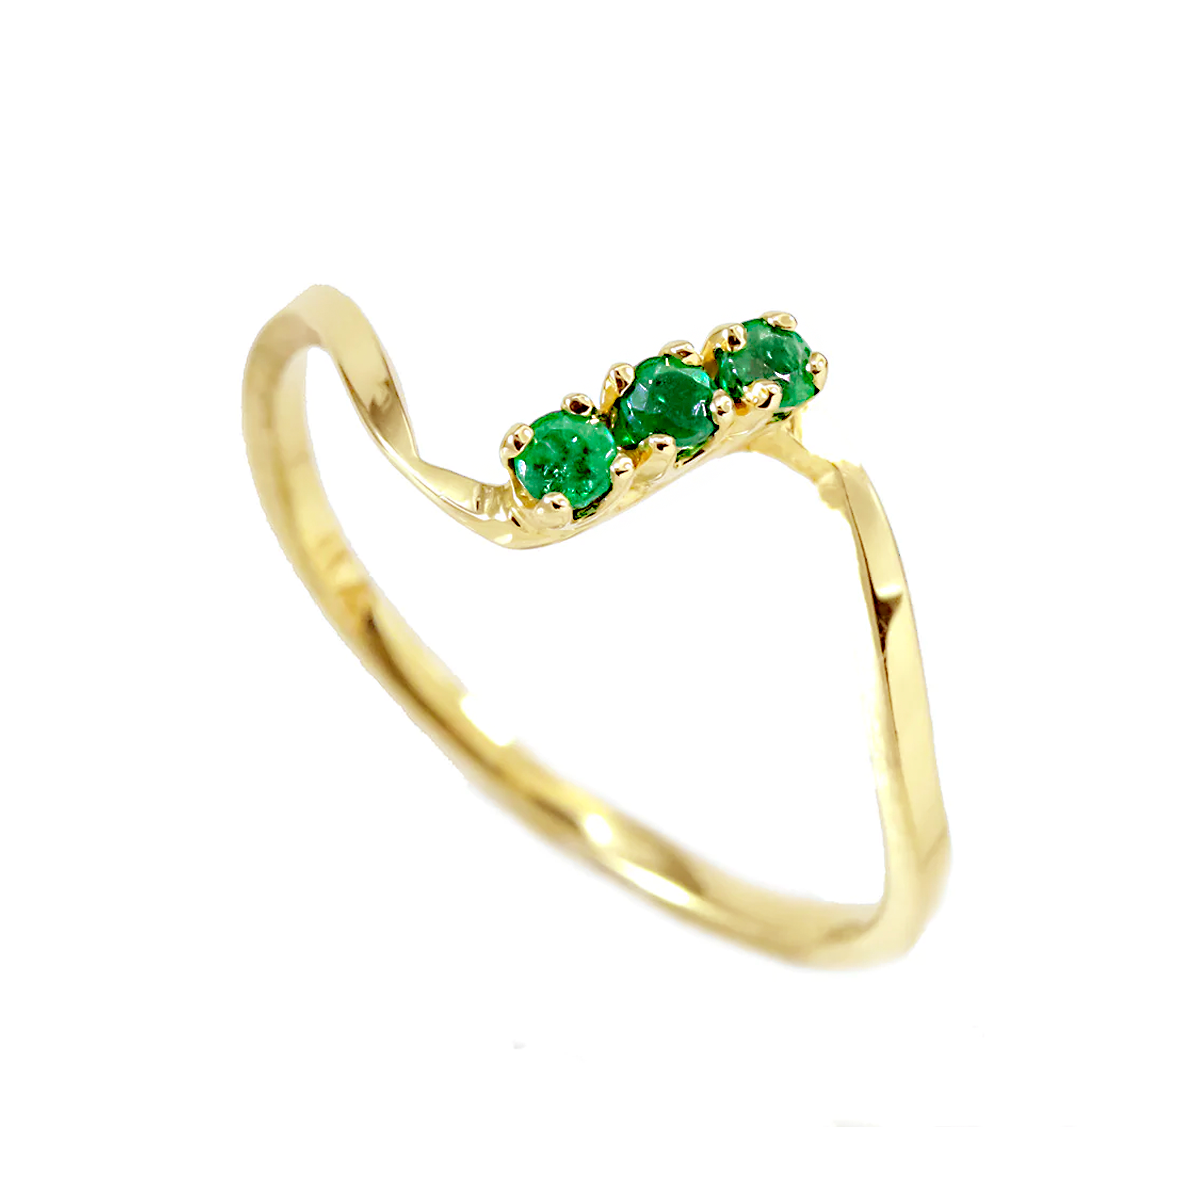 SPECIAL ORDER - 14k Yellow Gold Emerald Ring